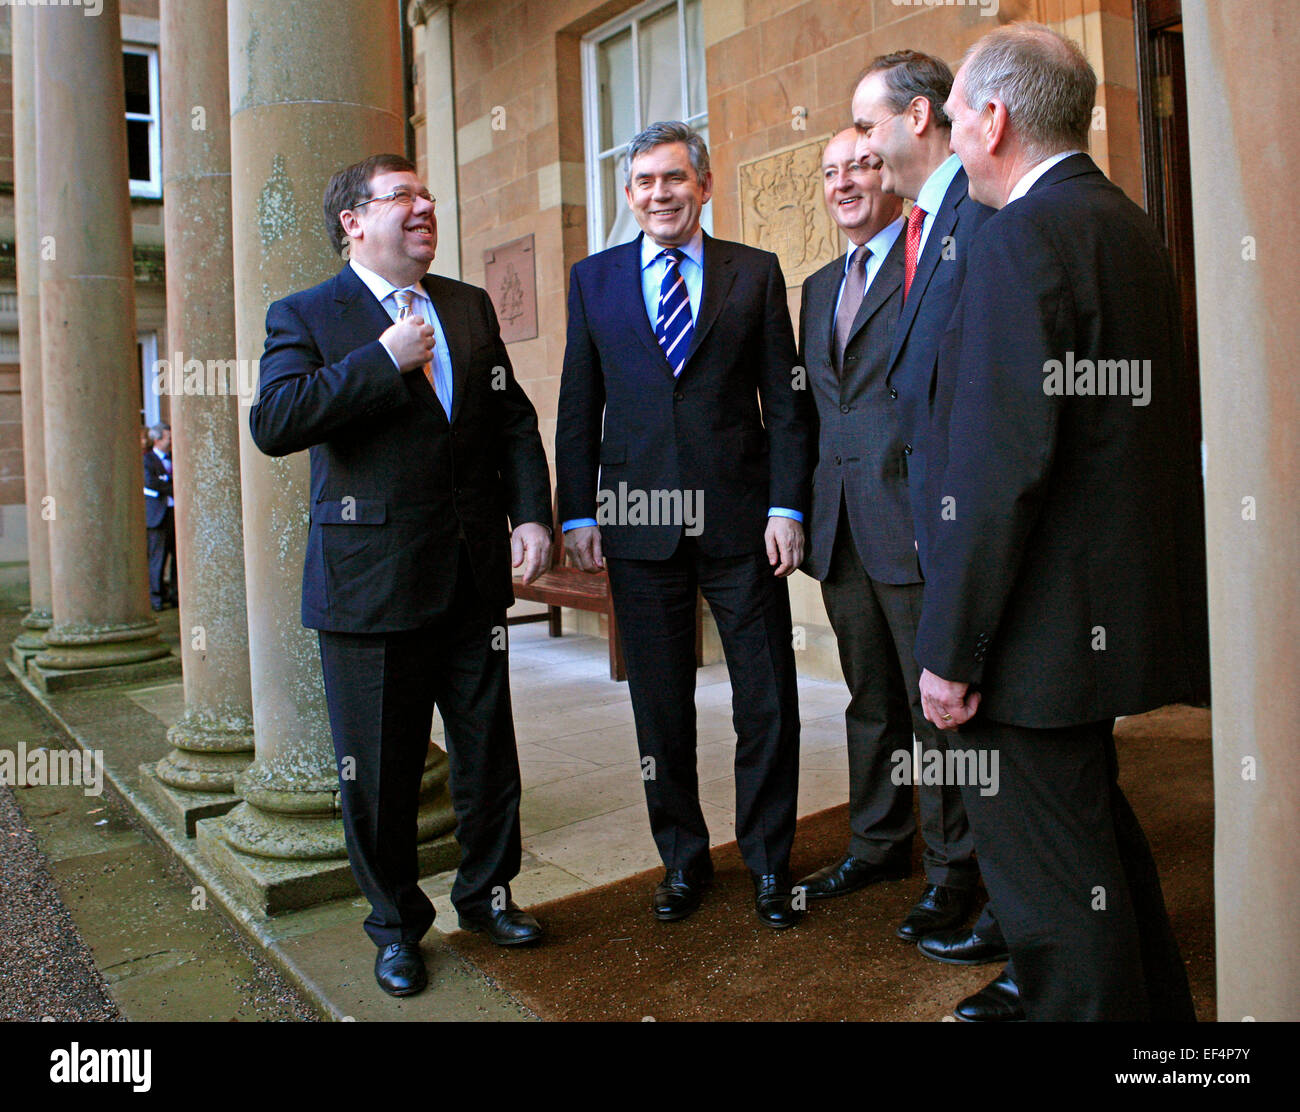 Irish Prime Minister Brian Cowen (L) and Britian's Prime Minister Gordon Brown (2L) are greeted by Secrretary of State for Northern Ireland Shawn Woodward (3R), Irish Foreign Affairs Minster Michael Martin (2R) and Northern Ireland Seurity Minister Paul Goggins (R) at Hillsborough Castle in Hillsborough, Northern Ireland February 5, 2010. Stock Photo